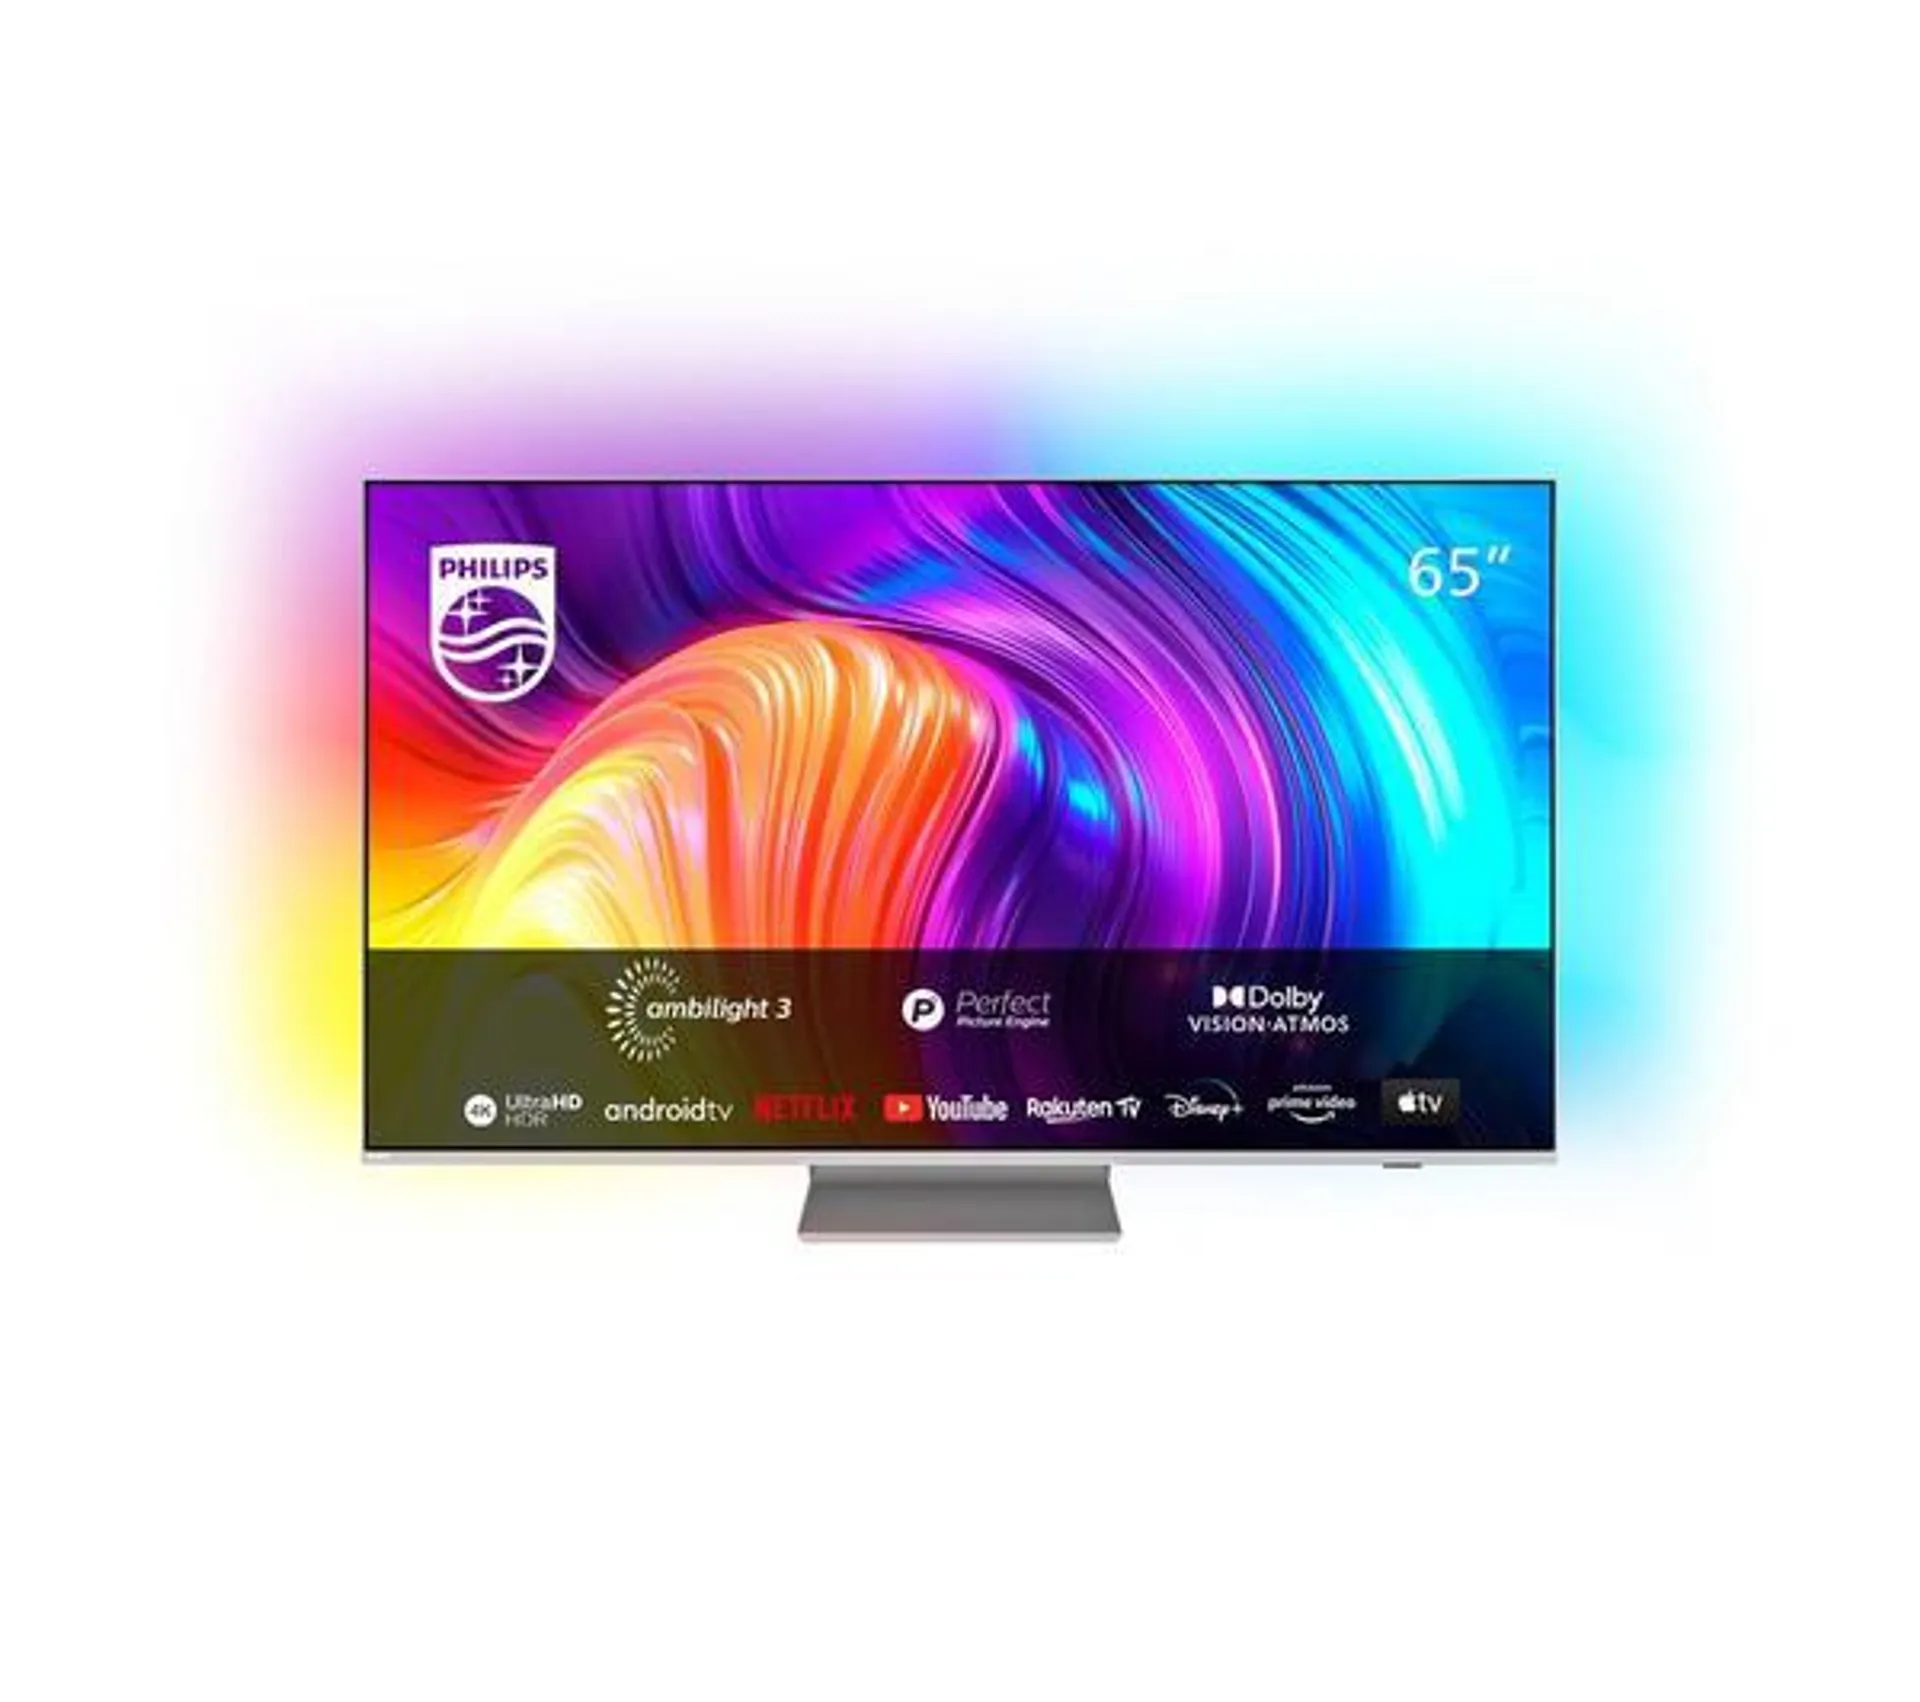 PHILIPS 65PUS8807/12 65" Smart 4K Ultra HD HDR LED TV with Google Assistant